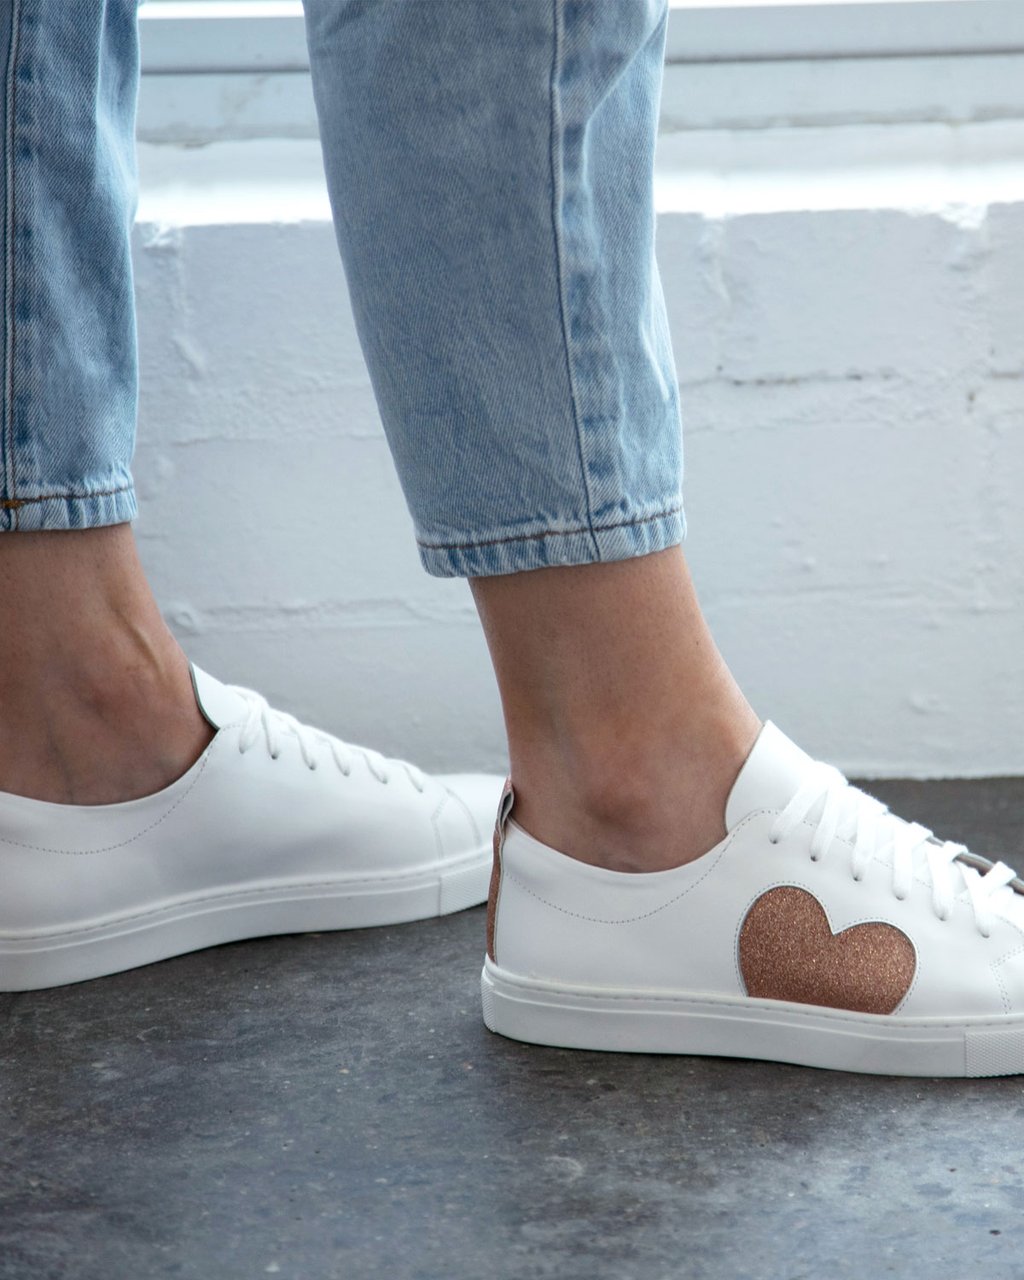 Haven Leather Heart Rose Glitter Sneakers